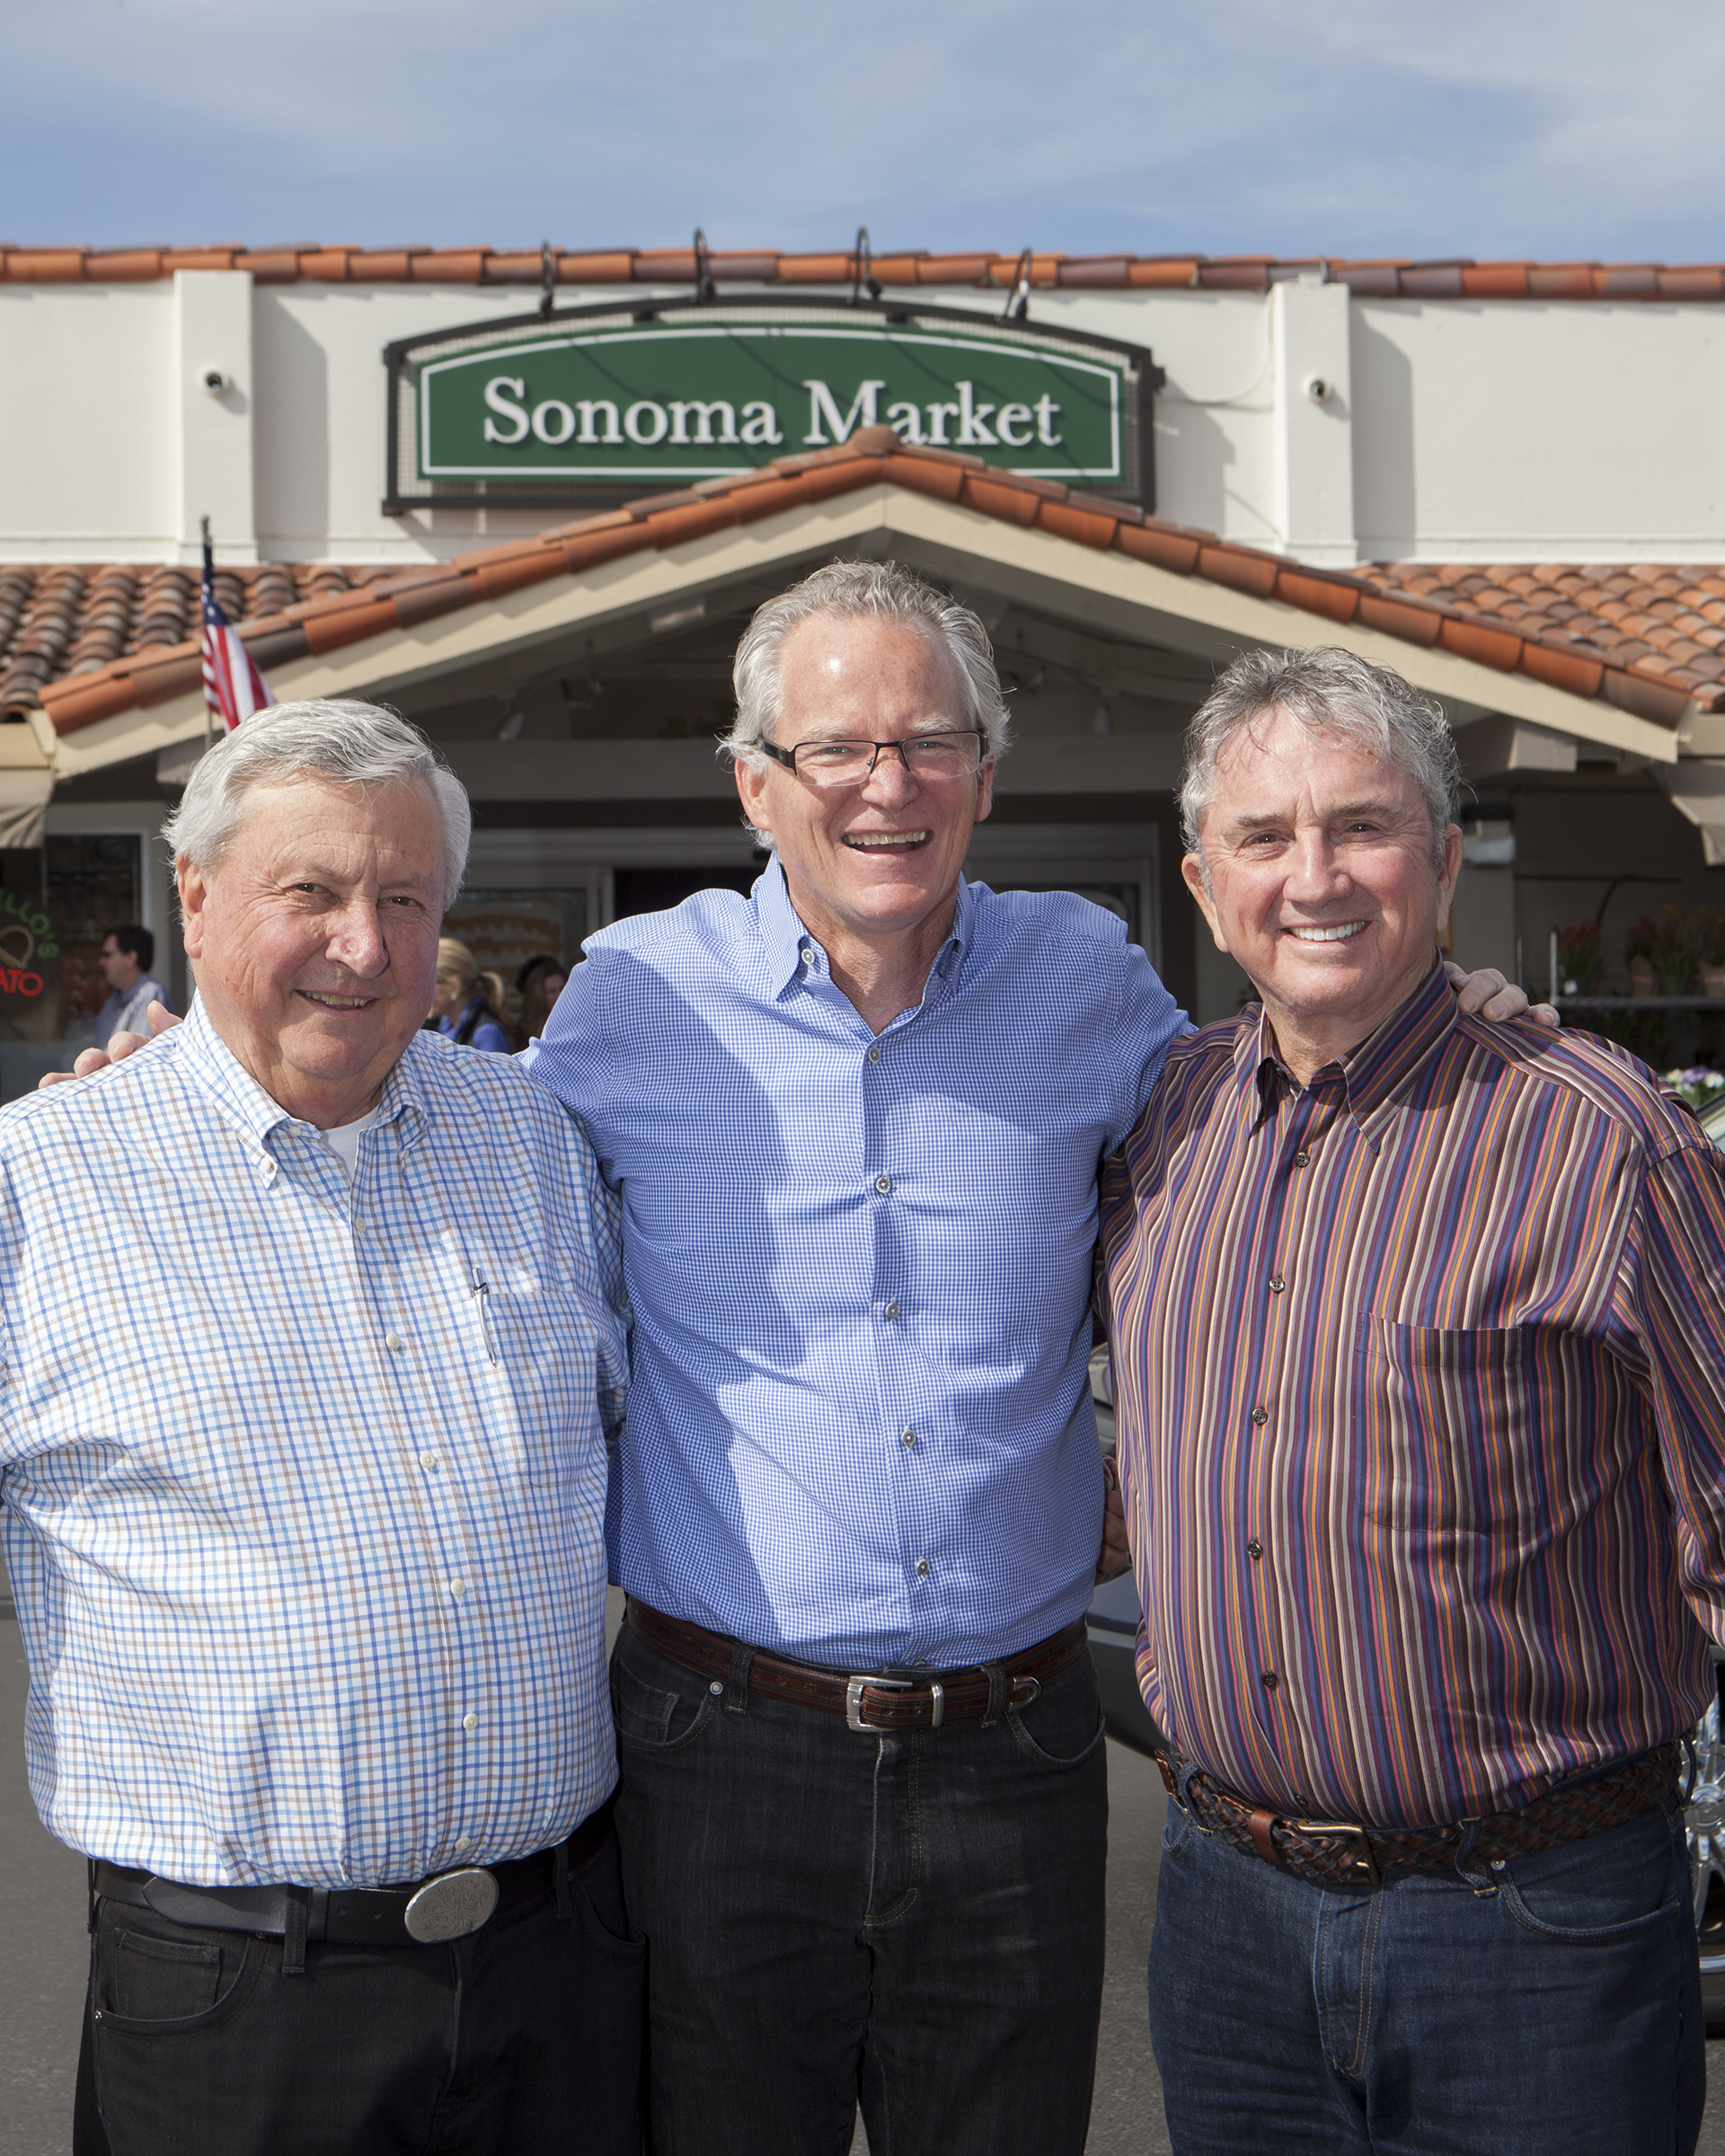 Don Shone and Dale Downing (left and right), co-owners of Sonoma Markets, celebrate with Eric Stille, president and CEO of Nugget Markets.